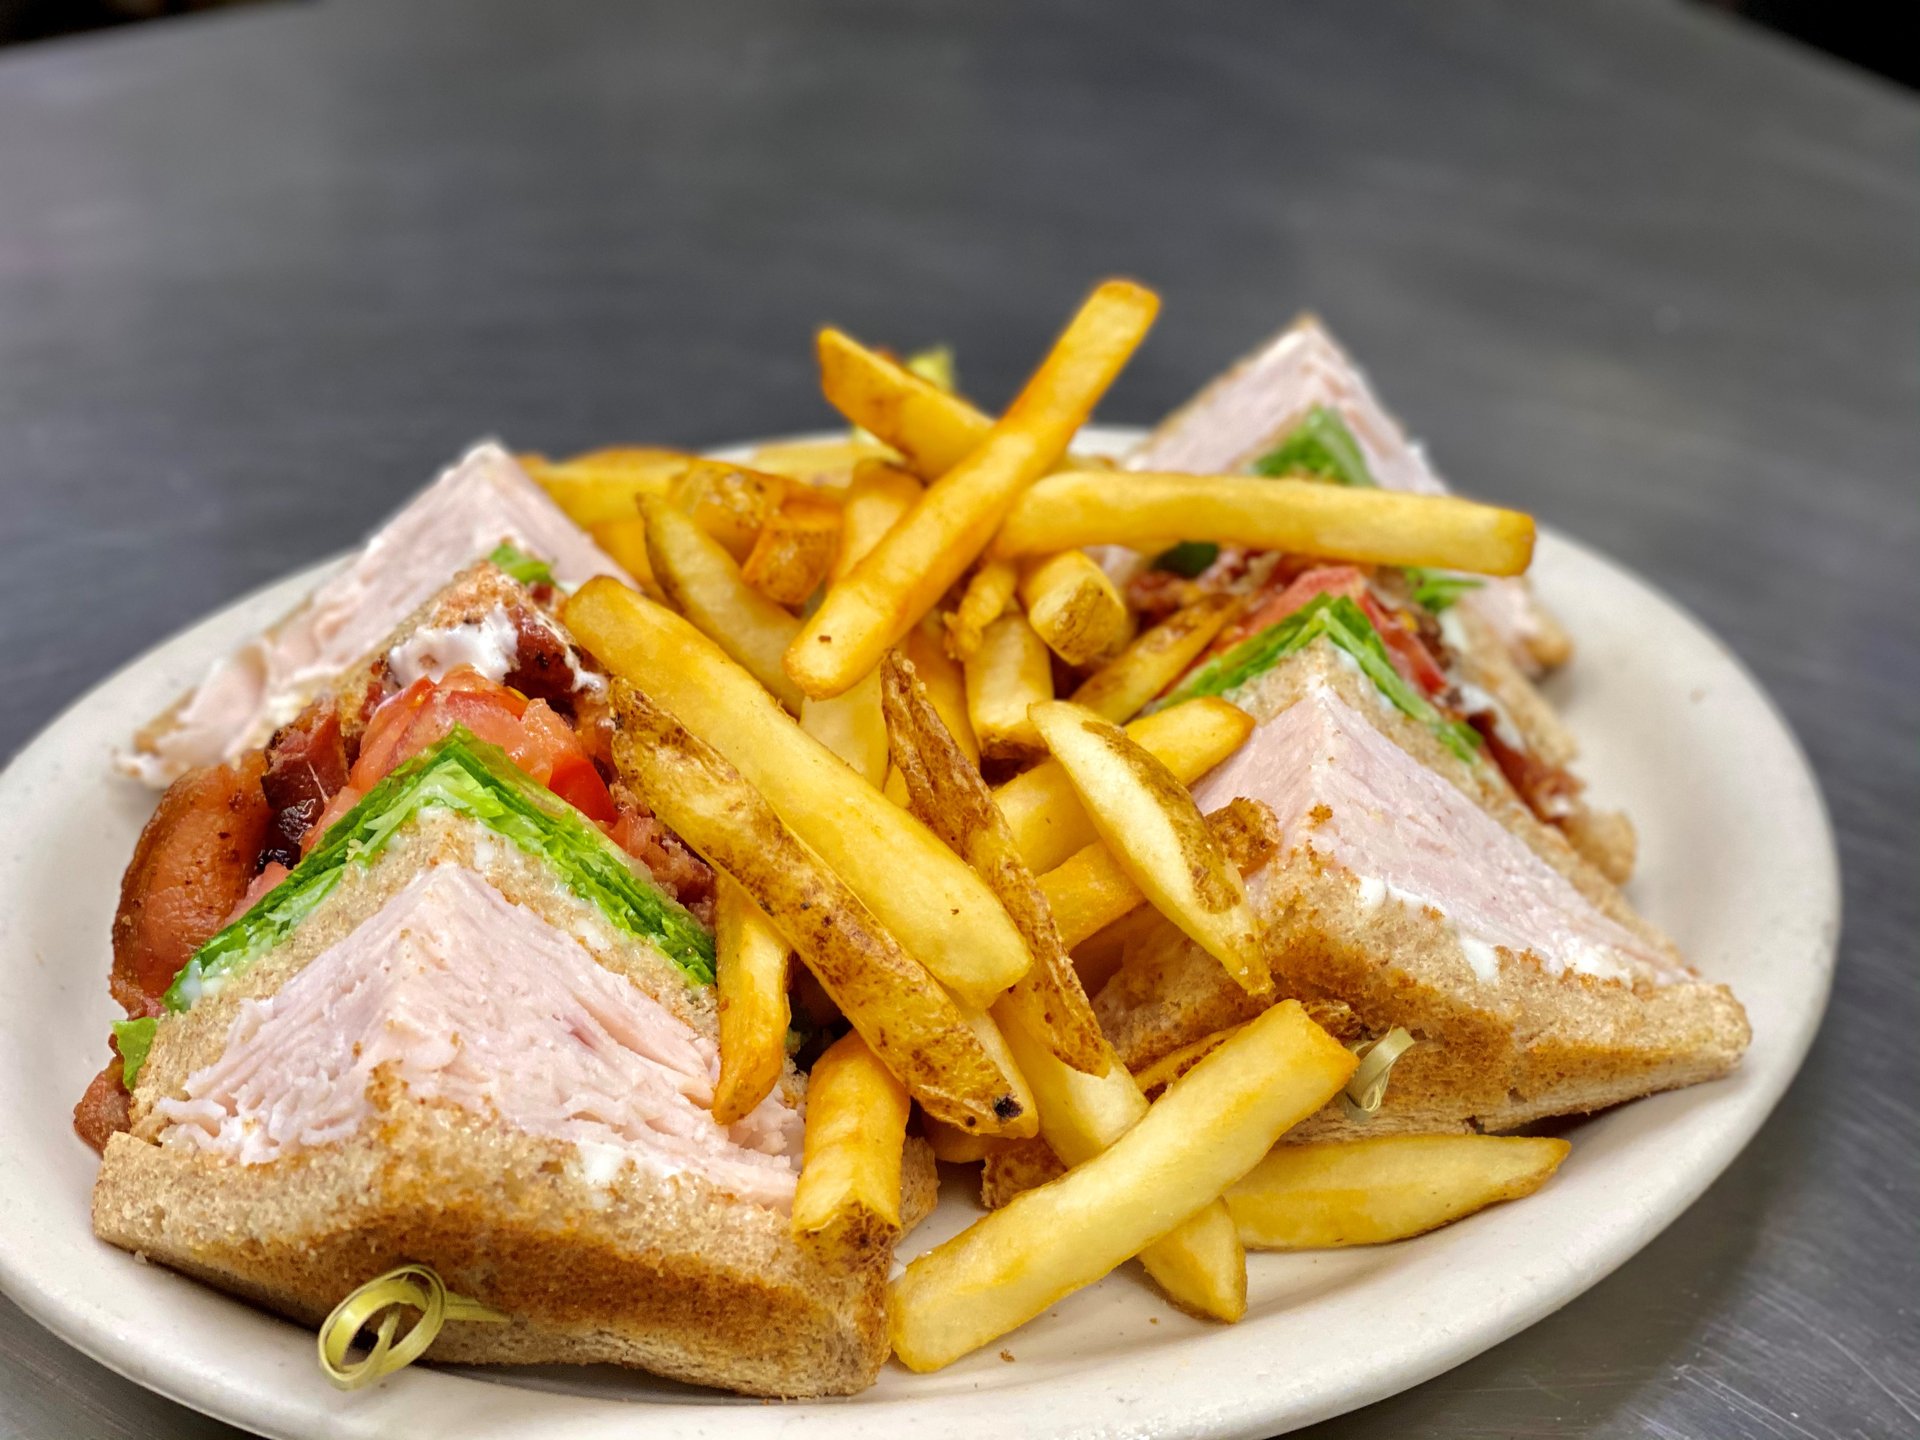 who makes the best club sandwich near me